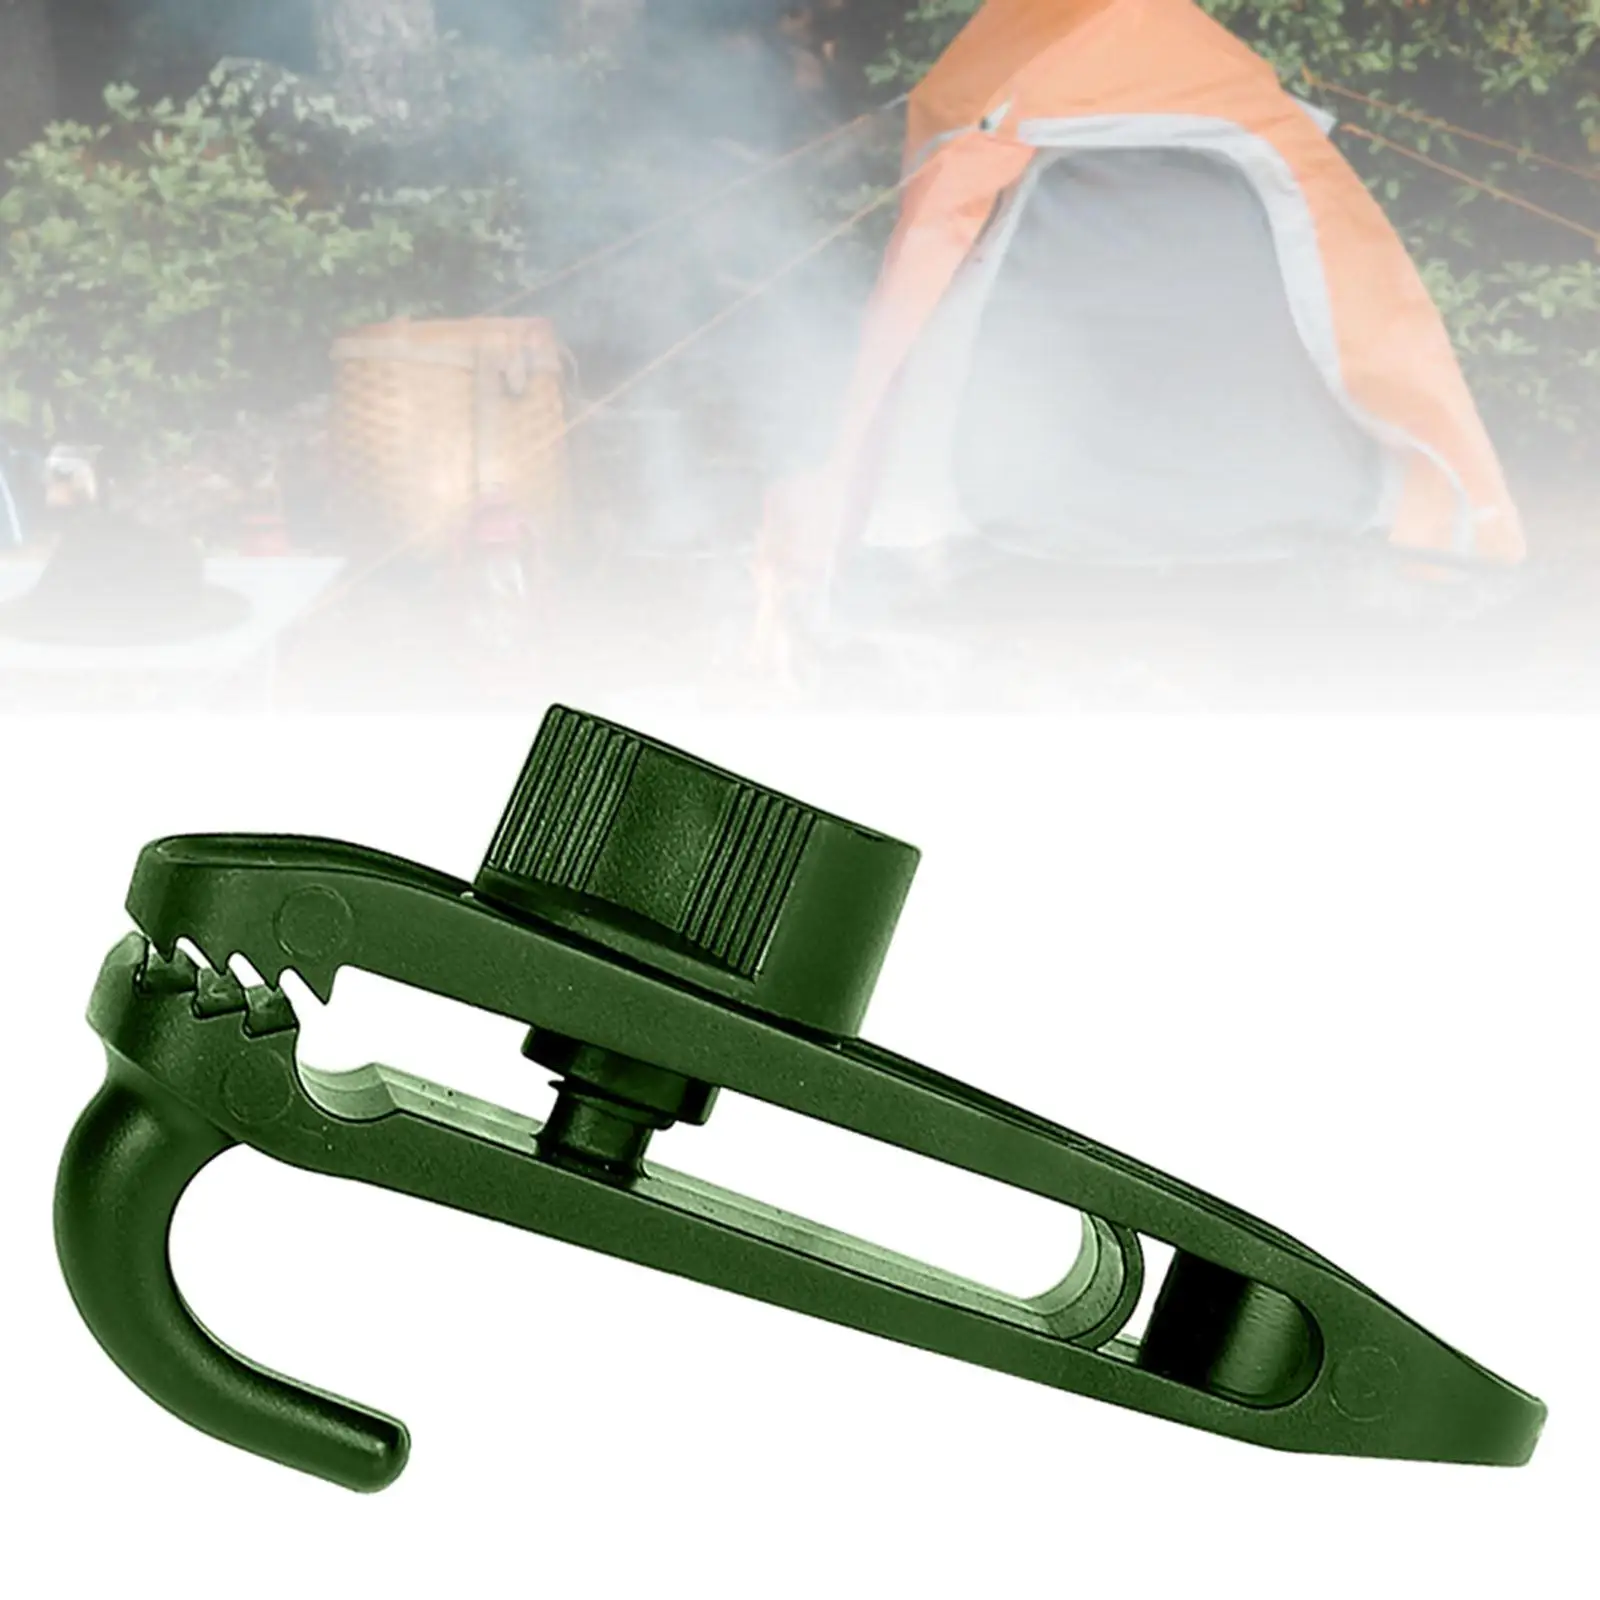 5Pcs Tarp Clips with Hook Fixing Heavy Duty Rope Barb Tensioner Durable Covers Lock Grip Clamps for Canvas Outdoor Canopies Car